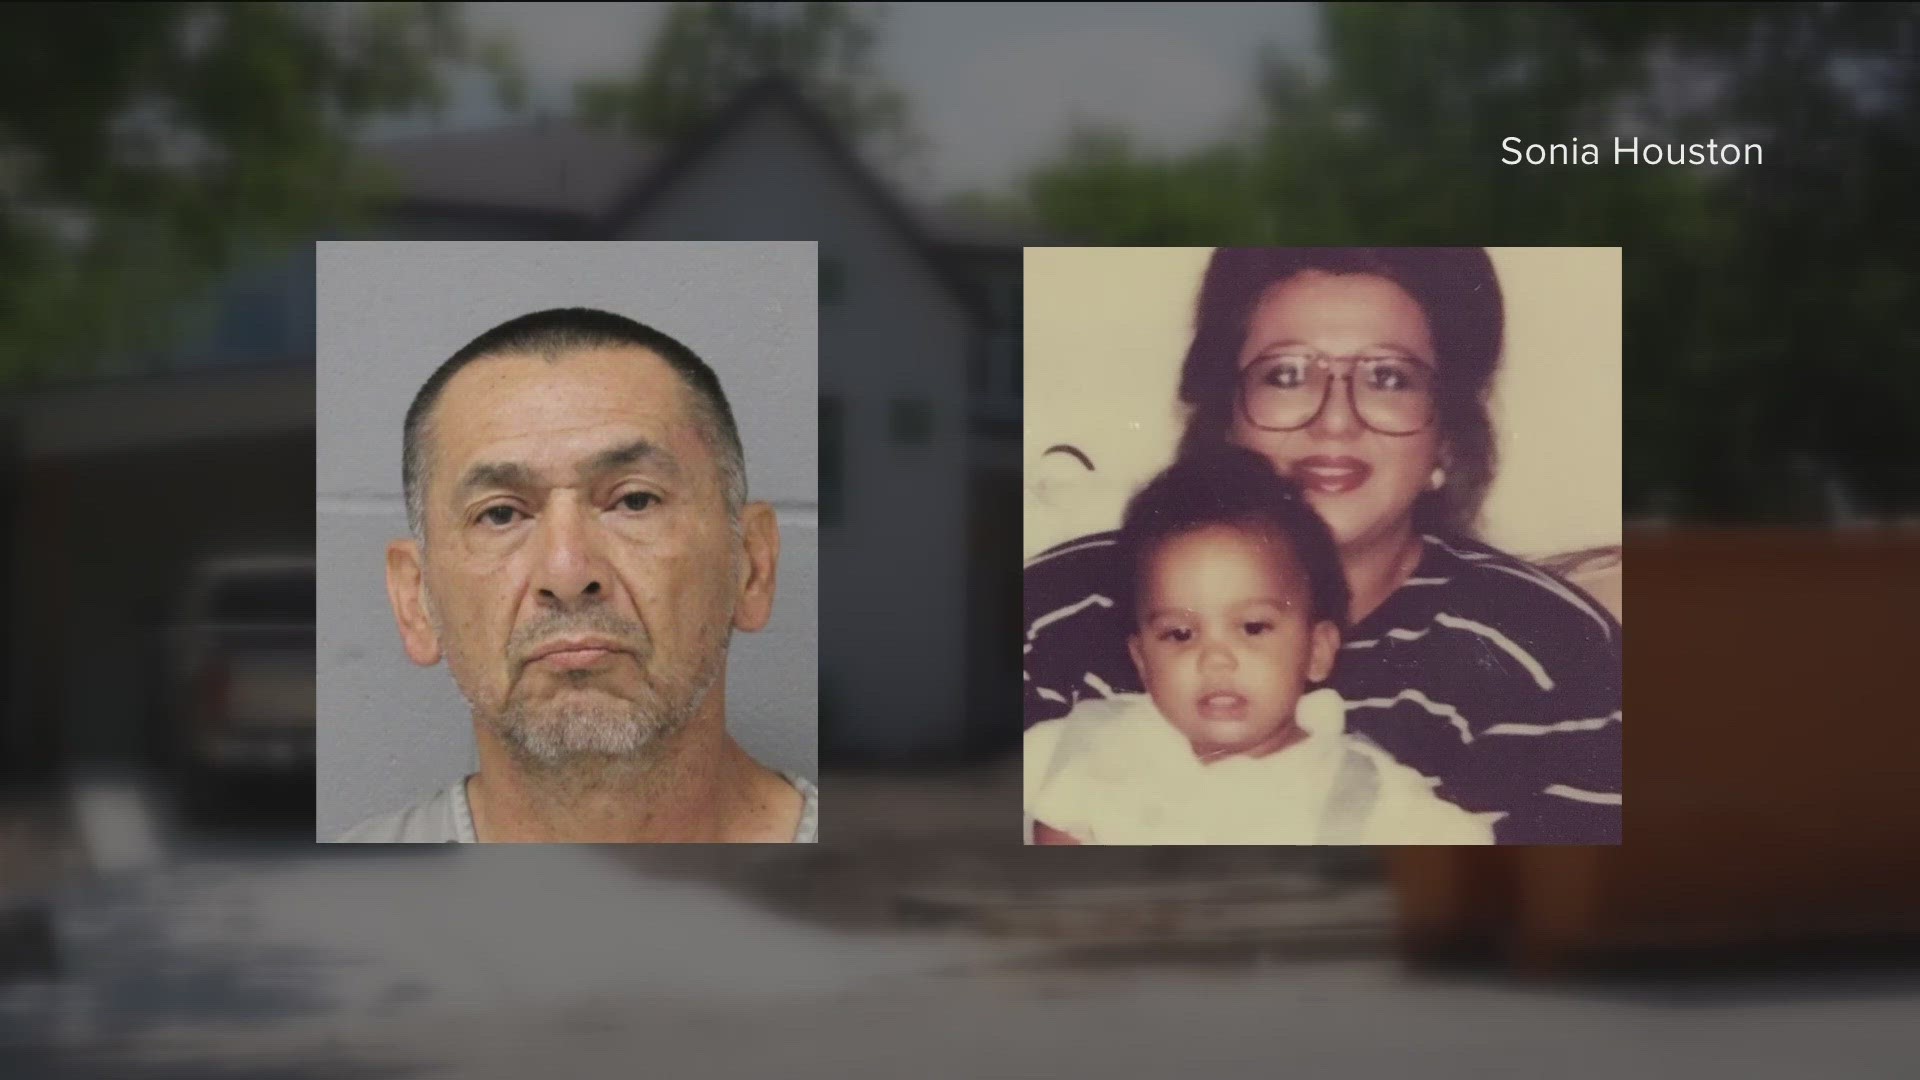 We're learning new details on how Austin police mishandled evidence in a murder investigation that's linked to accused serial killer Raul Meza Jr.